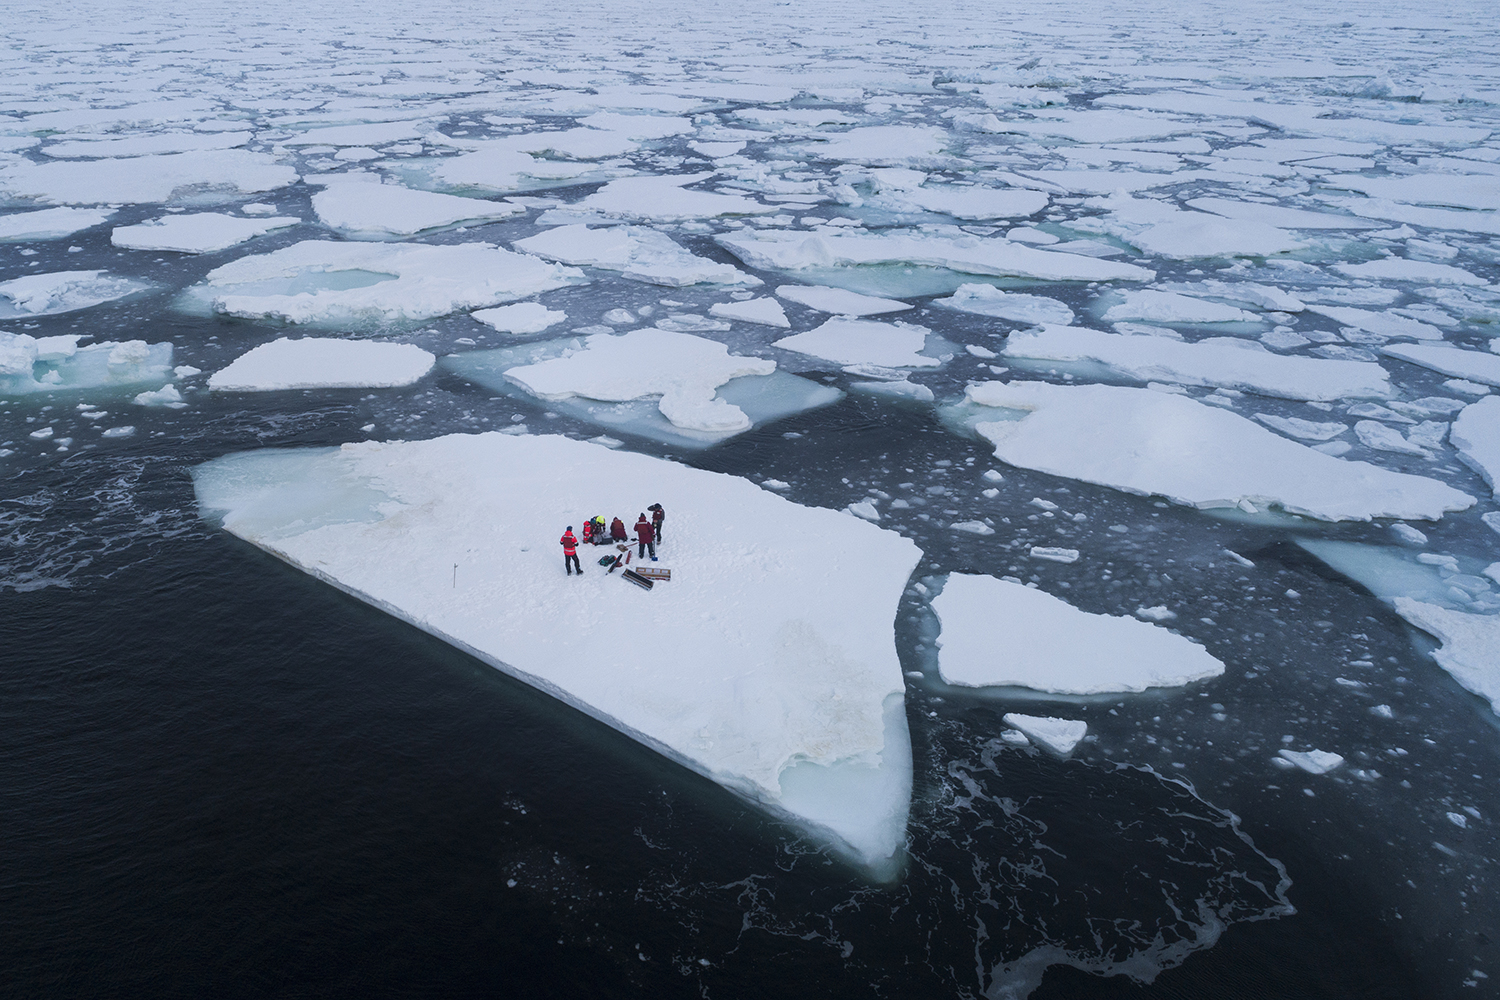 Aerial view of scientists taking sea ice core samples, measure snow and ice thickness, and water column properties below the ice at the  Arctic ice edge in Fram Strait, between Svalbard and Greenland. A group of US scientists is collecting data at the Arctic sea ice edge in May 2019 during the time of spring algae blooms to study the interactions between melting sea ice and the local ecosystem.